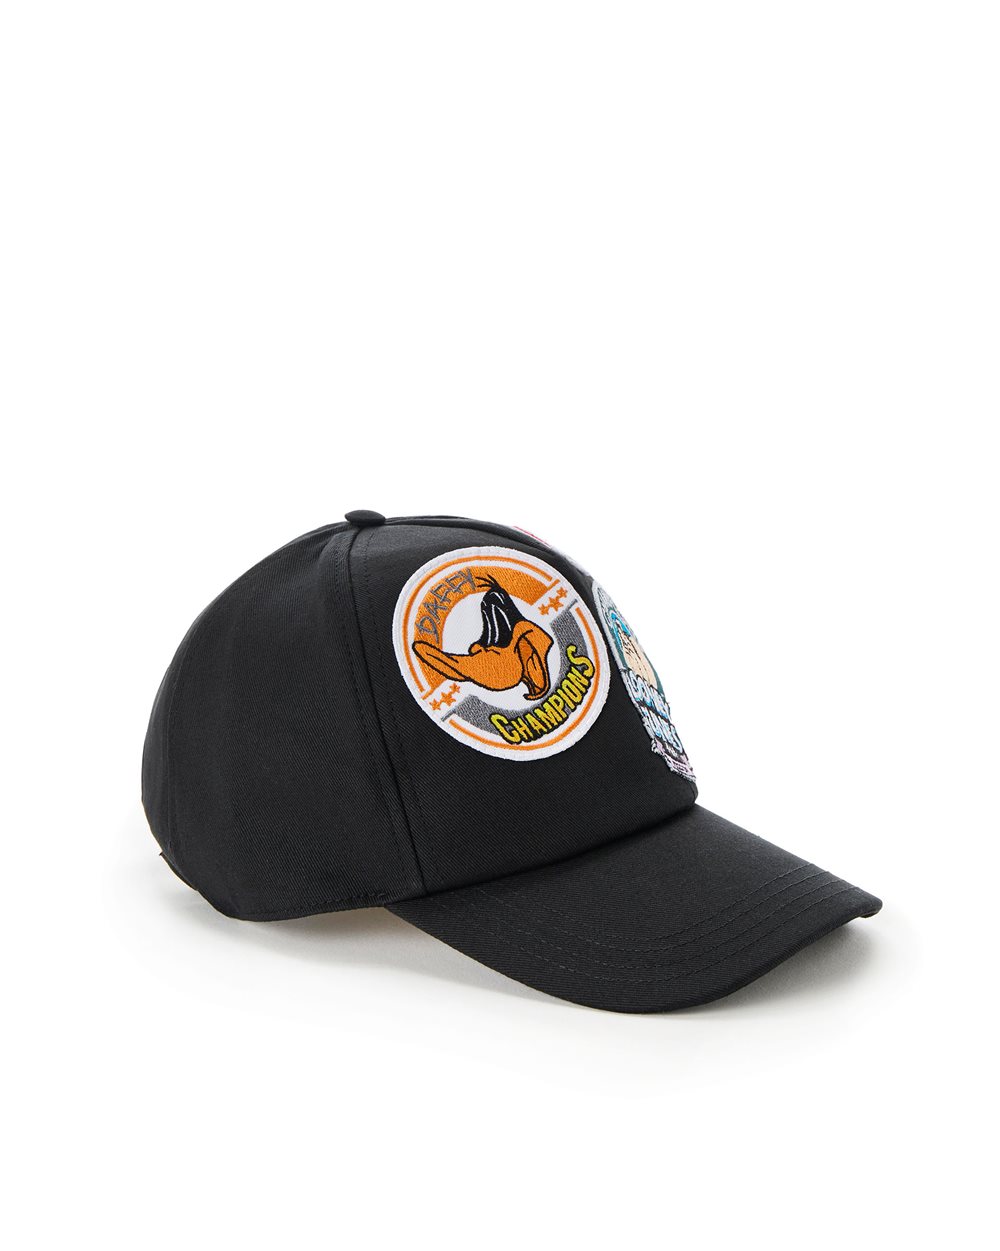 Baseball cap with cartoon patches and logo -  ( SECONDO STEP US )  PROMO UP TO 50%  | Iceberg - Official Website